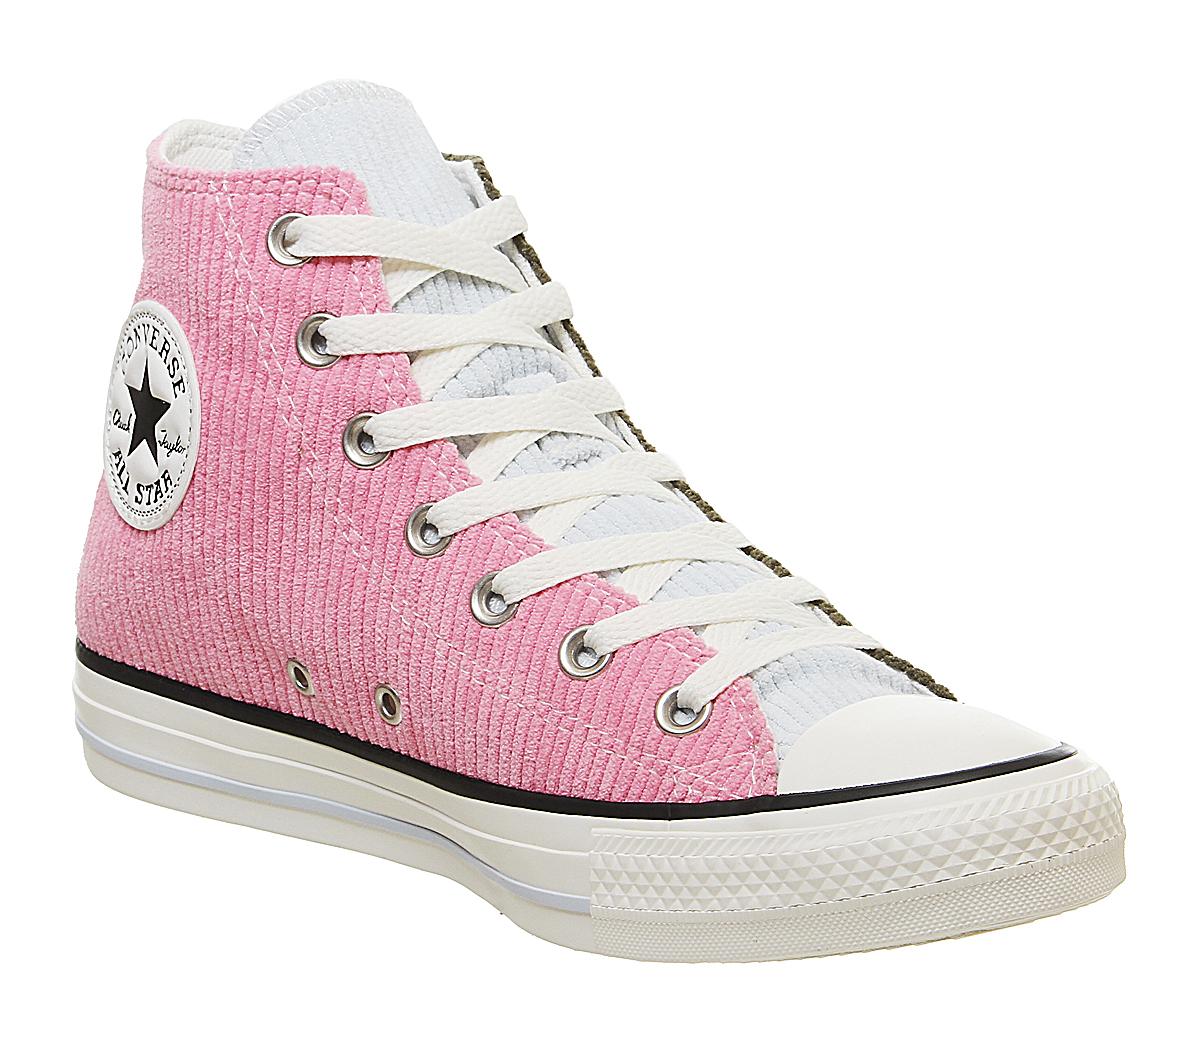 converse all star pink